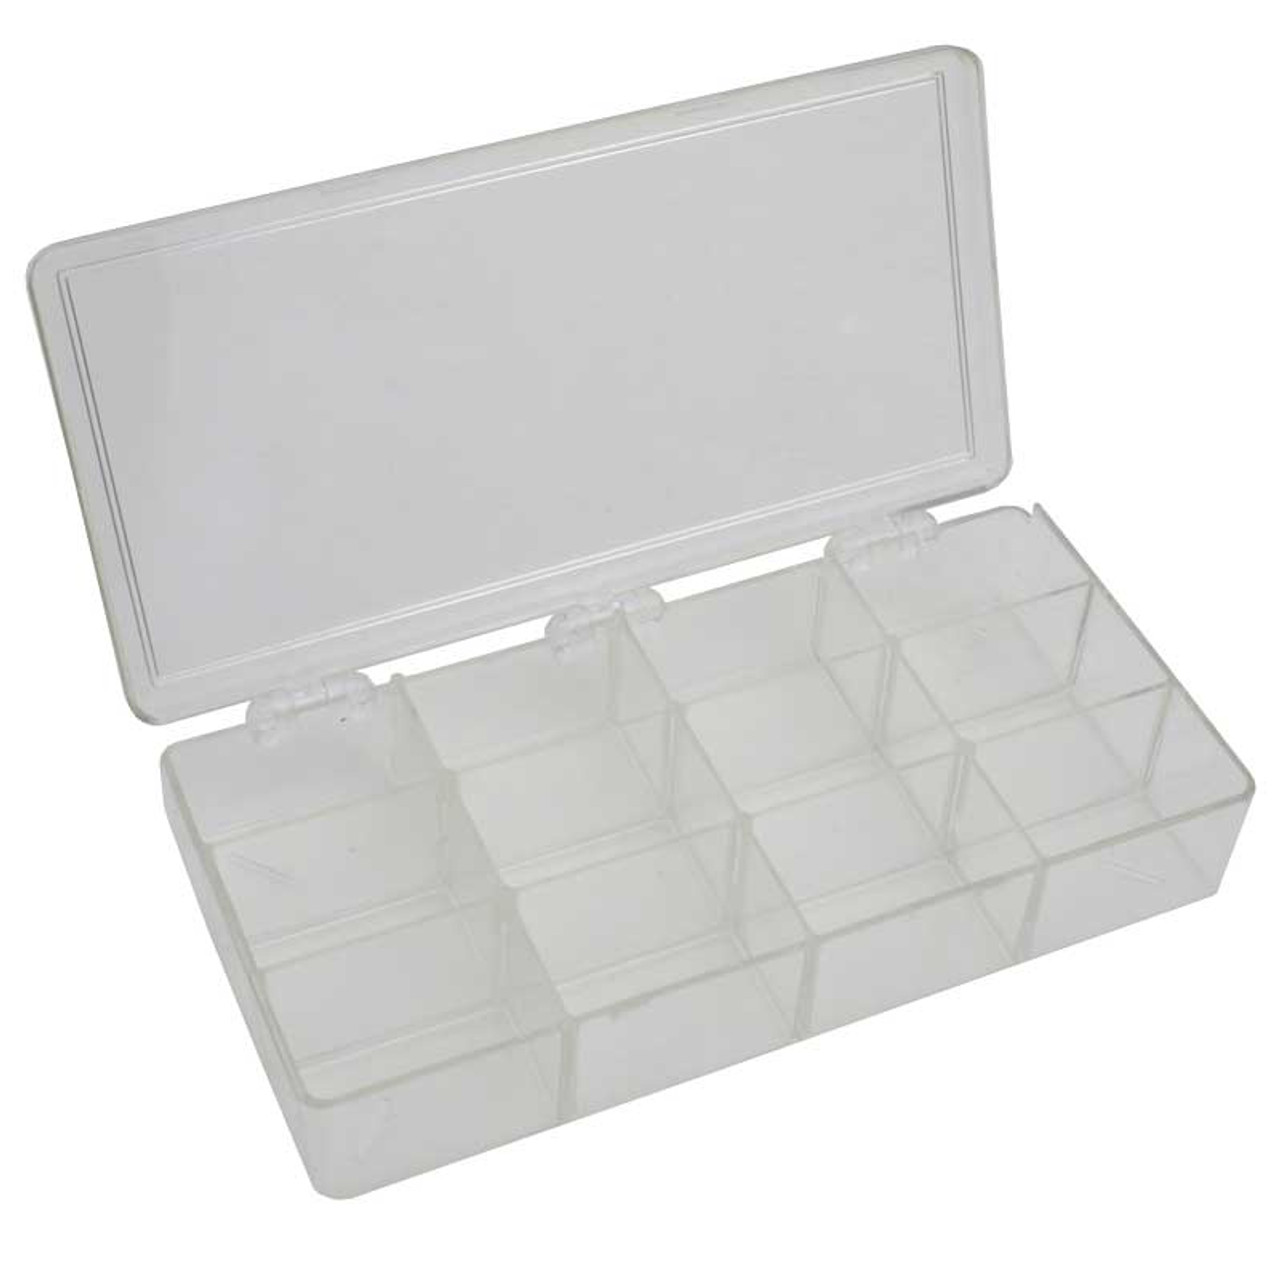 Plastic 12-Compartment Organizer Box for Jewelry and Watch Parts